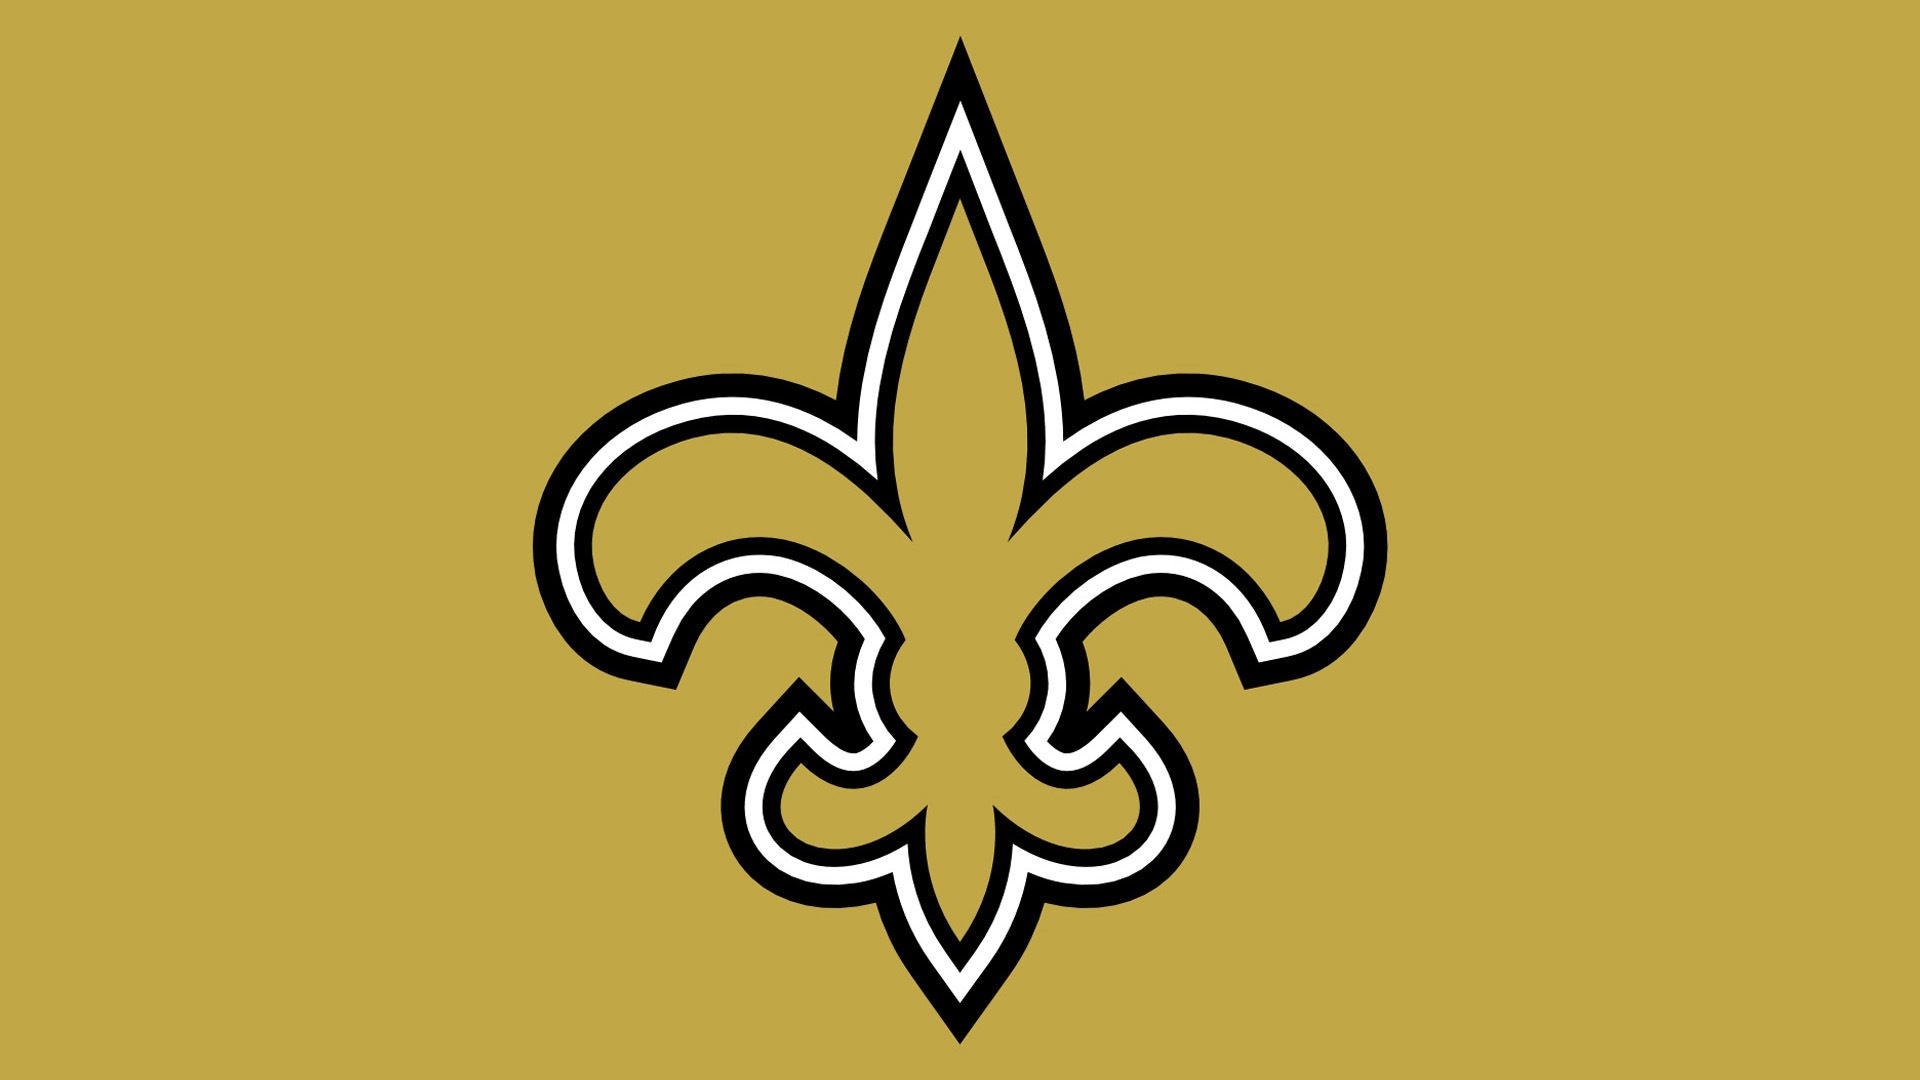 HD New Orleans Saints Backgrounds With Resolution 1920X1080 pixel. You can make this wallpaper for your Mac or Windows Desktop Background, iPhone, Android or Tablet and another Smartphone device for free